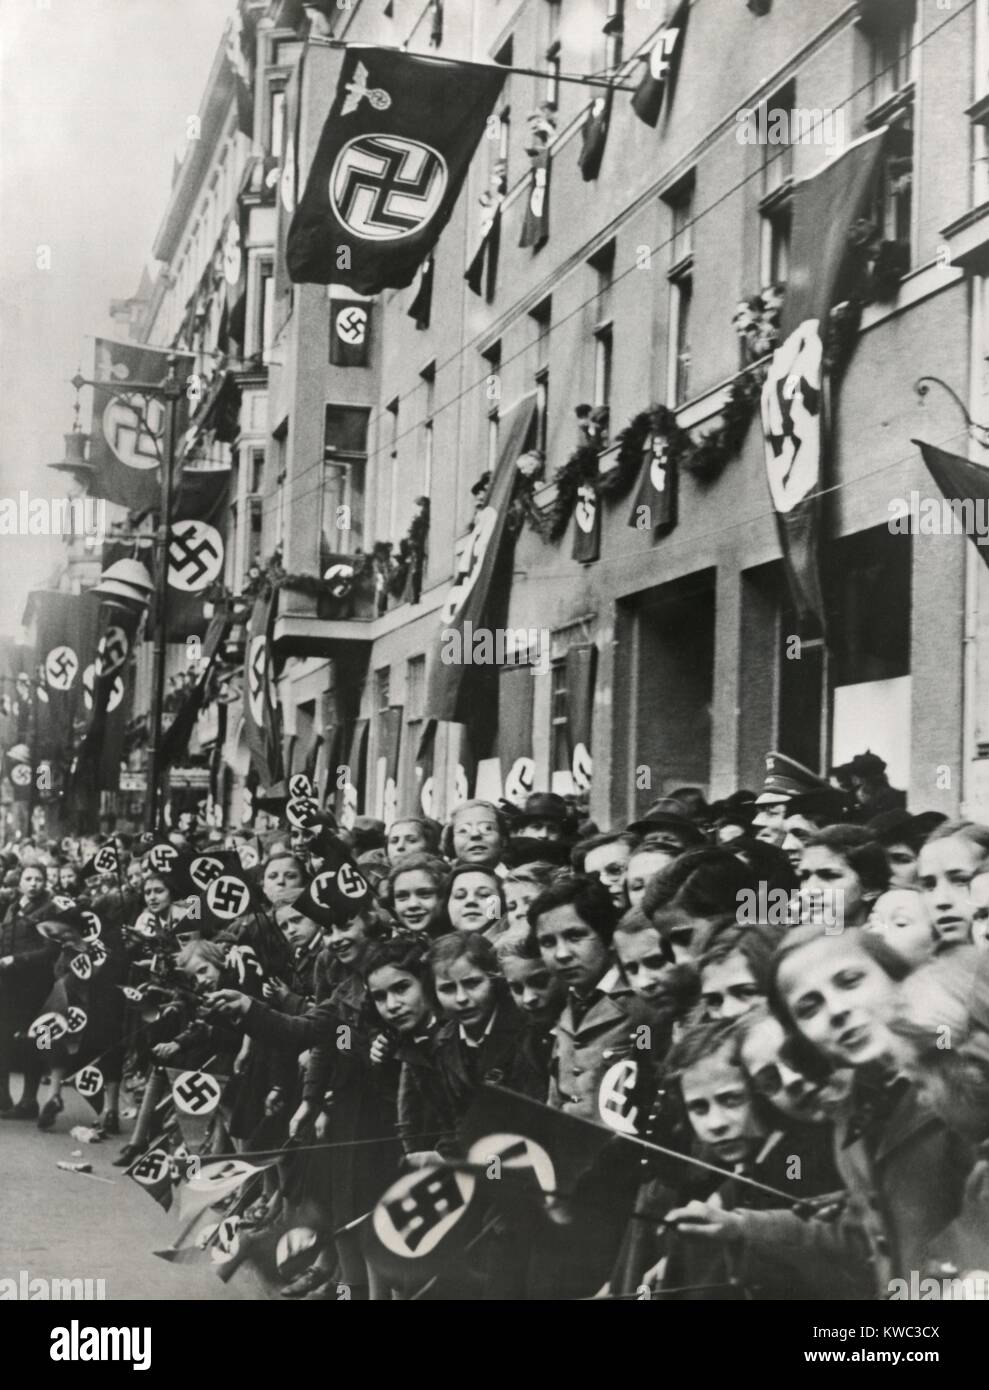 German children equipped with swastika flags look toward an advancing Nazi parade. Ca. 1935-1939. Unidentified location. (BSLOC 2015 13 50) Stock Photo